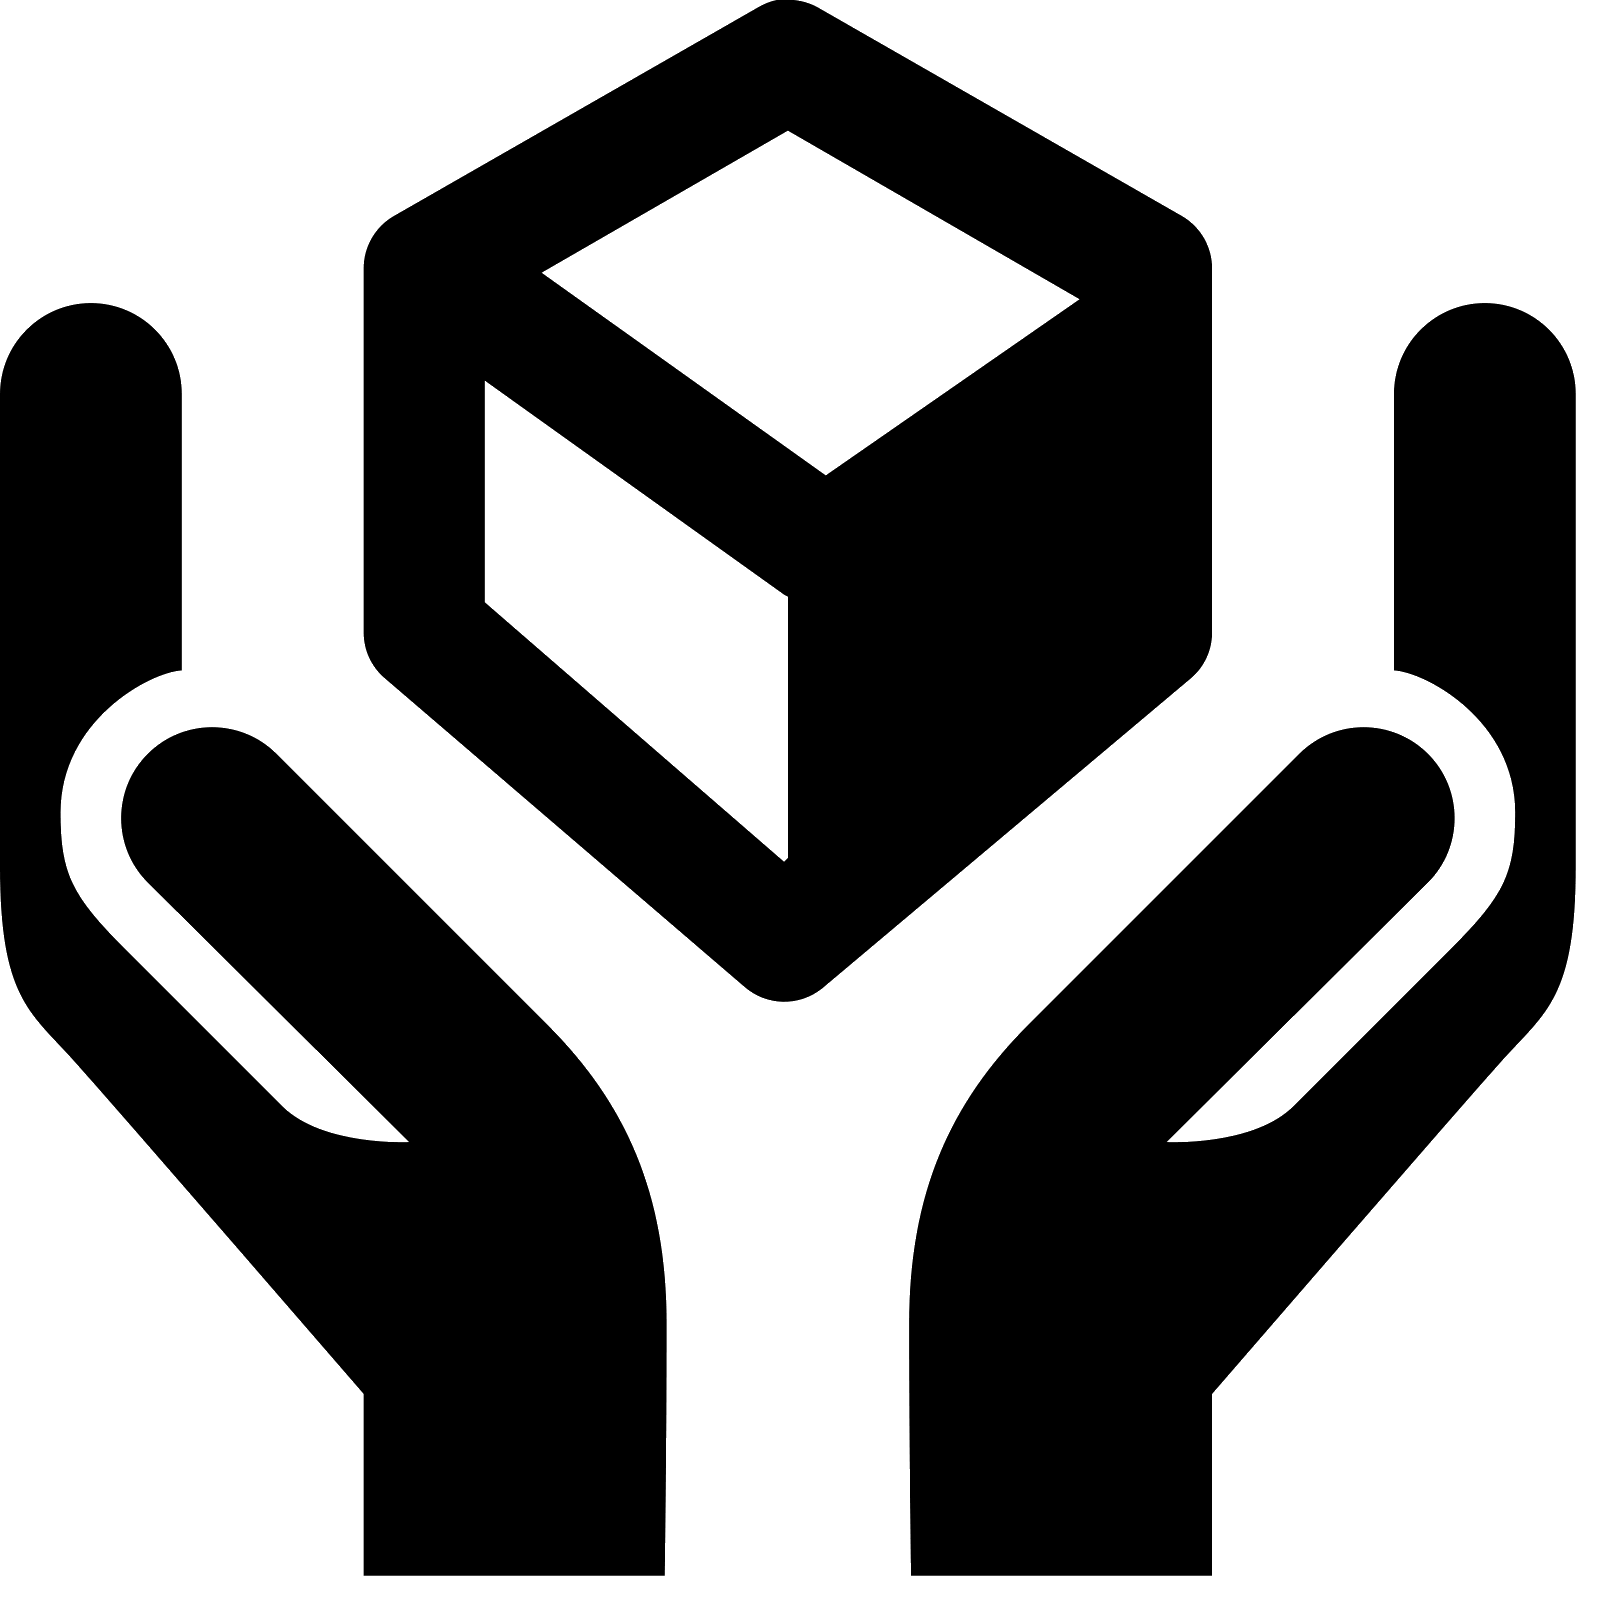 2 Hands Logo - Two hands logo png 5 » PNG Image